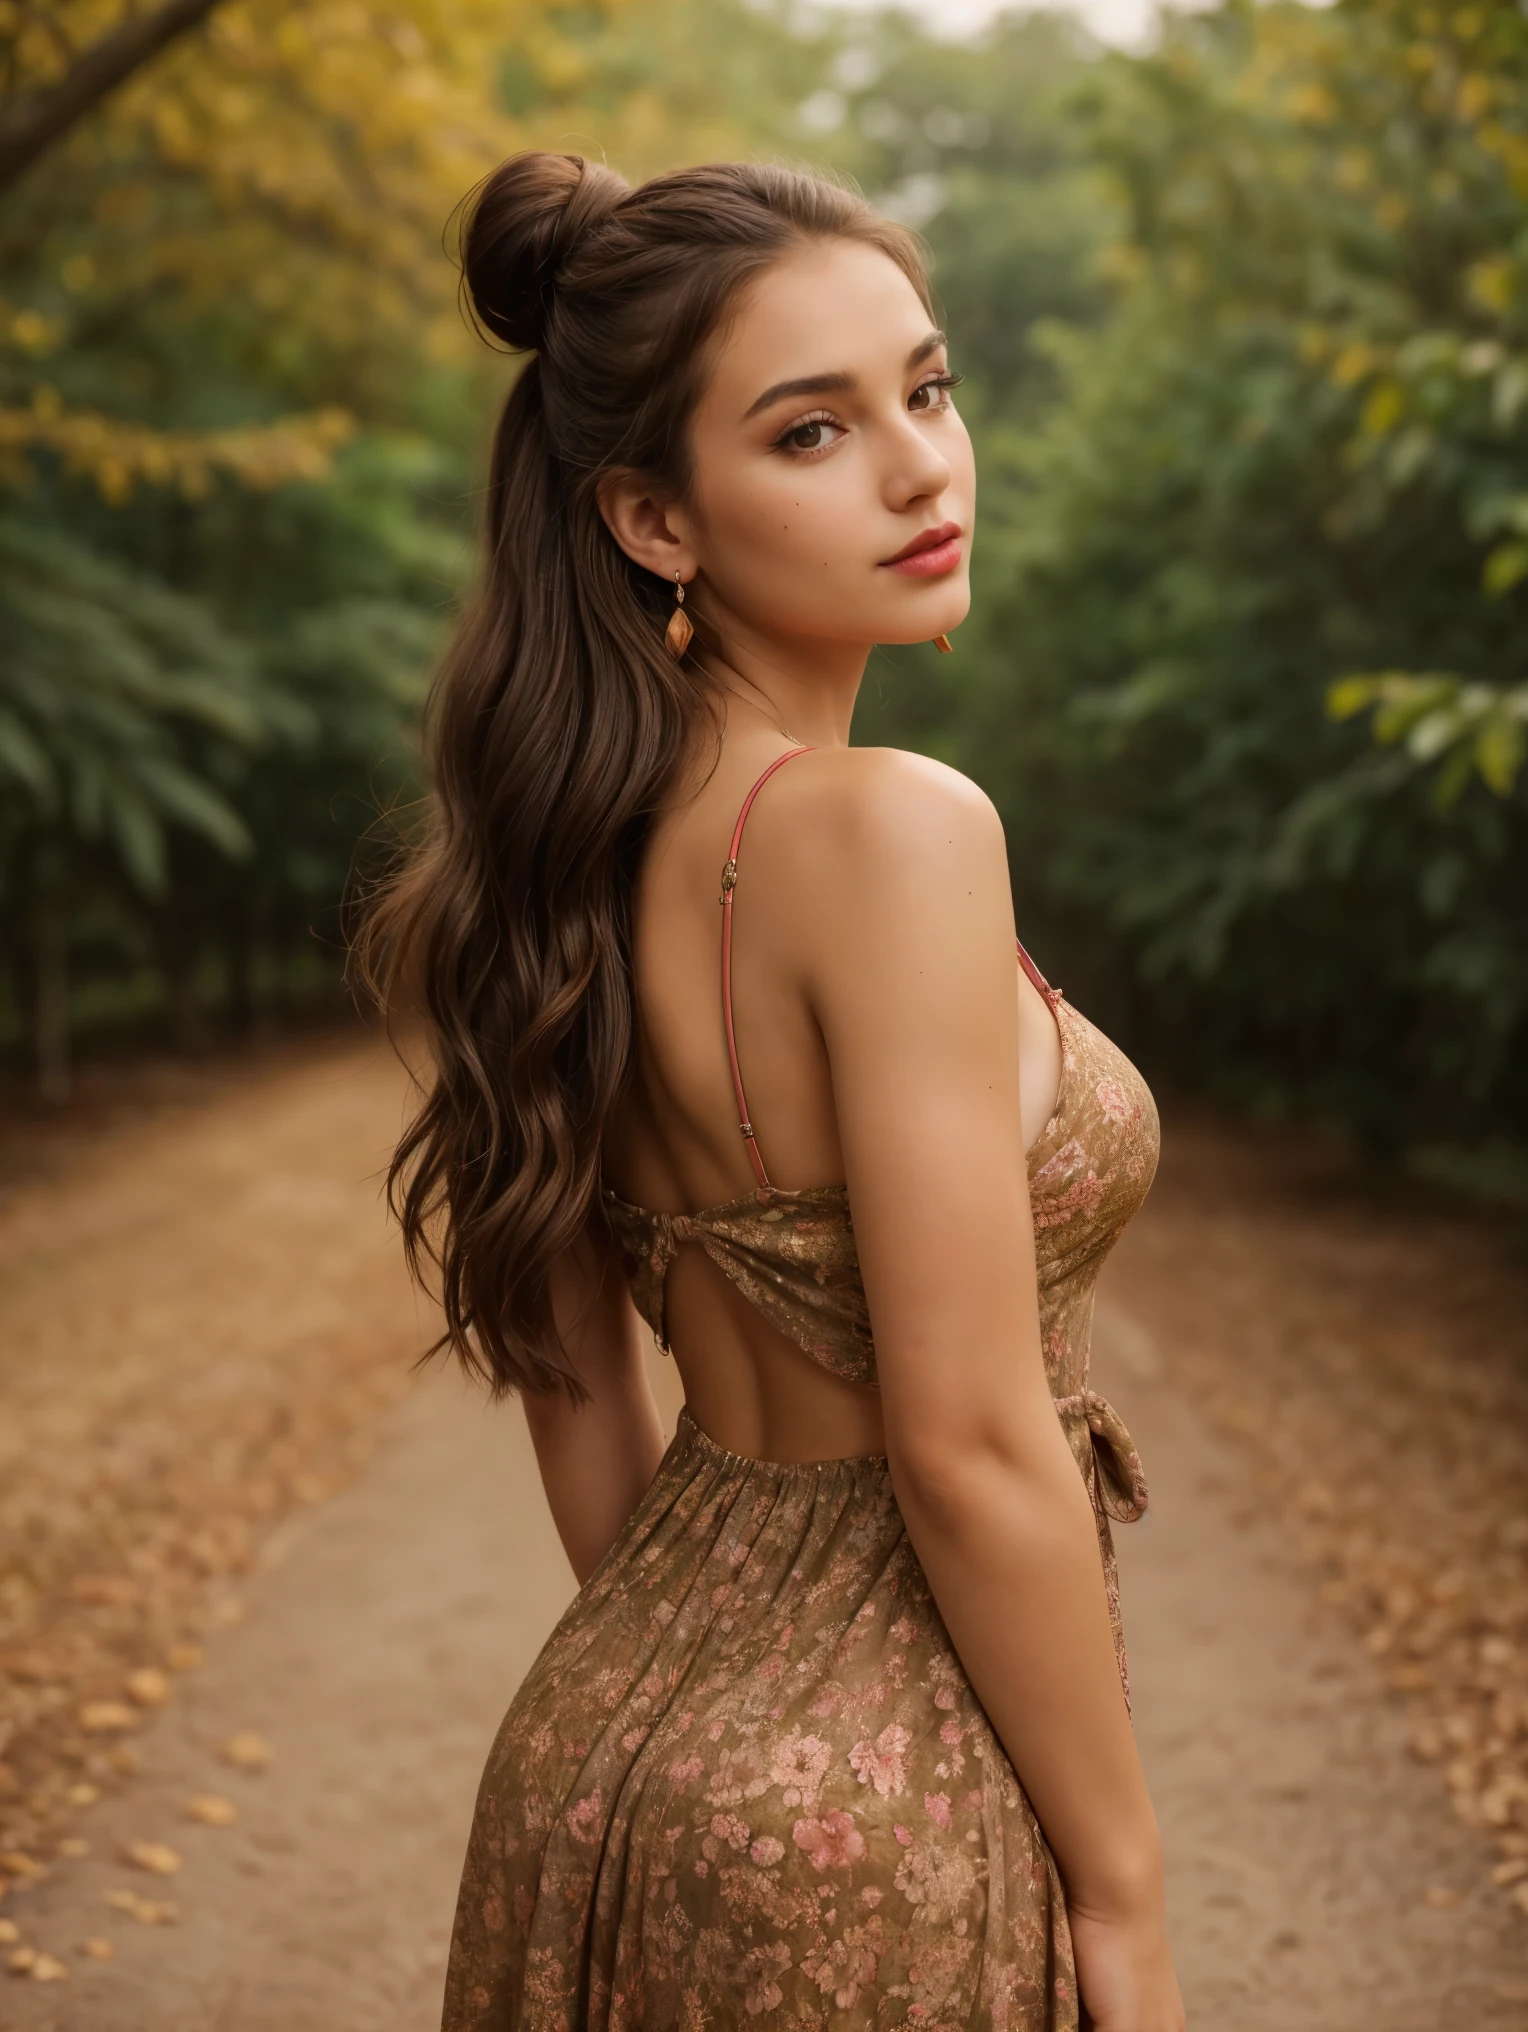 A half body photo portrait of a attractive woman 21 y.o.,  fully body posing shot, deep cleavage,
autumn, A floral maxi dress with heeled boots, Miss, Tall, Firm, Square Face, Dark Skin, Brunette Hair, Amber Eyes, Long Nose, Thick Lips, Sharp Chin, Shoulder-Length Hair, Wavy brown Hair, Messy Top Knot, medium breasts, Clip-on earrings, berry matte lipstick,
moles, skin imperfection,
Masterpiece, hi res, 8k, award winning, RAW photo, high quality, 35mm photograph, film grain, bokeh, professional, 4k, highly detailed, 